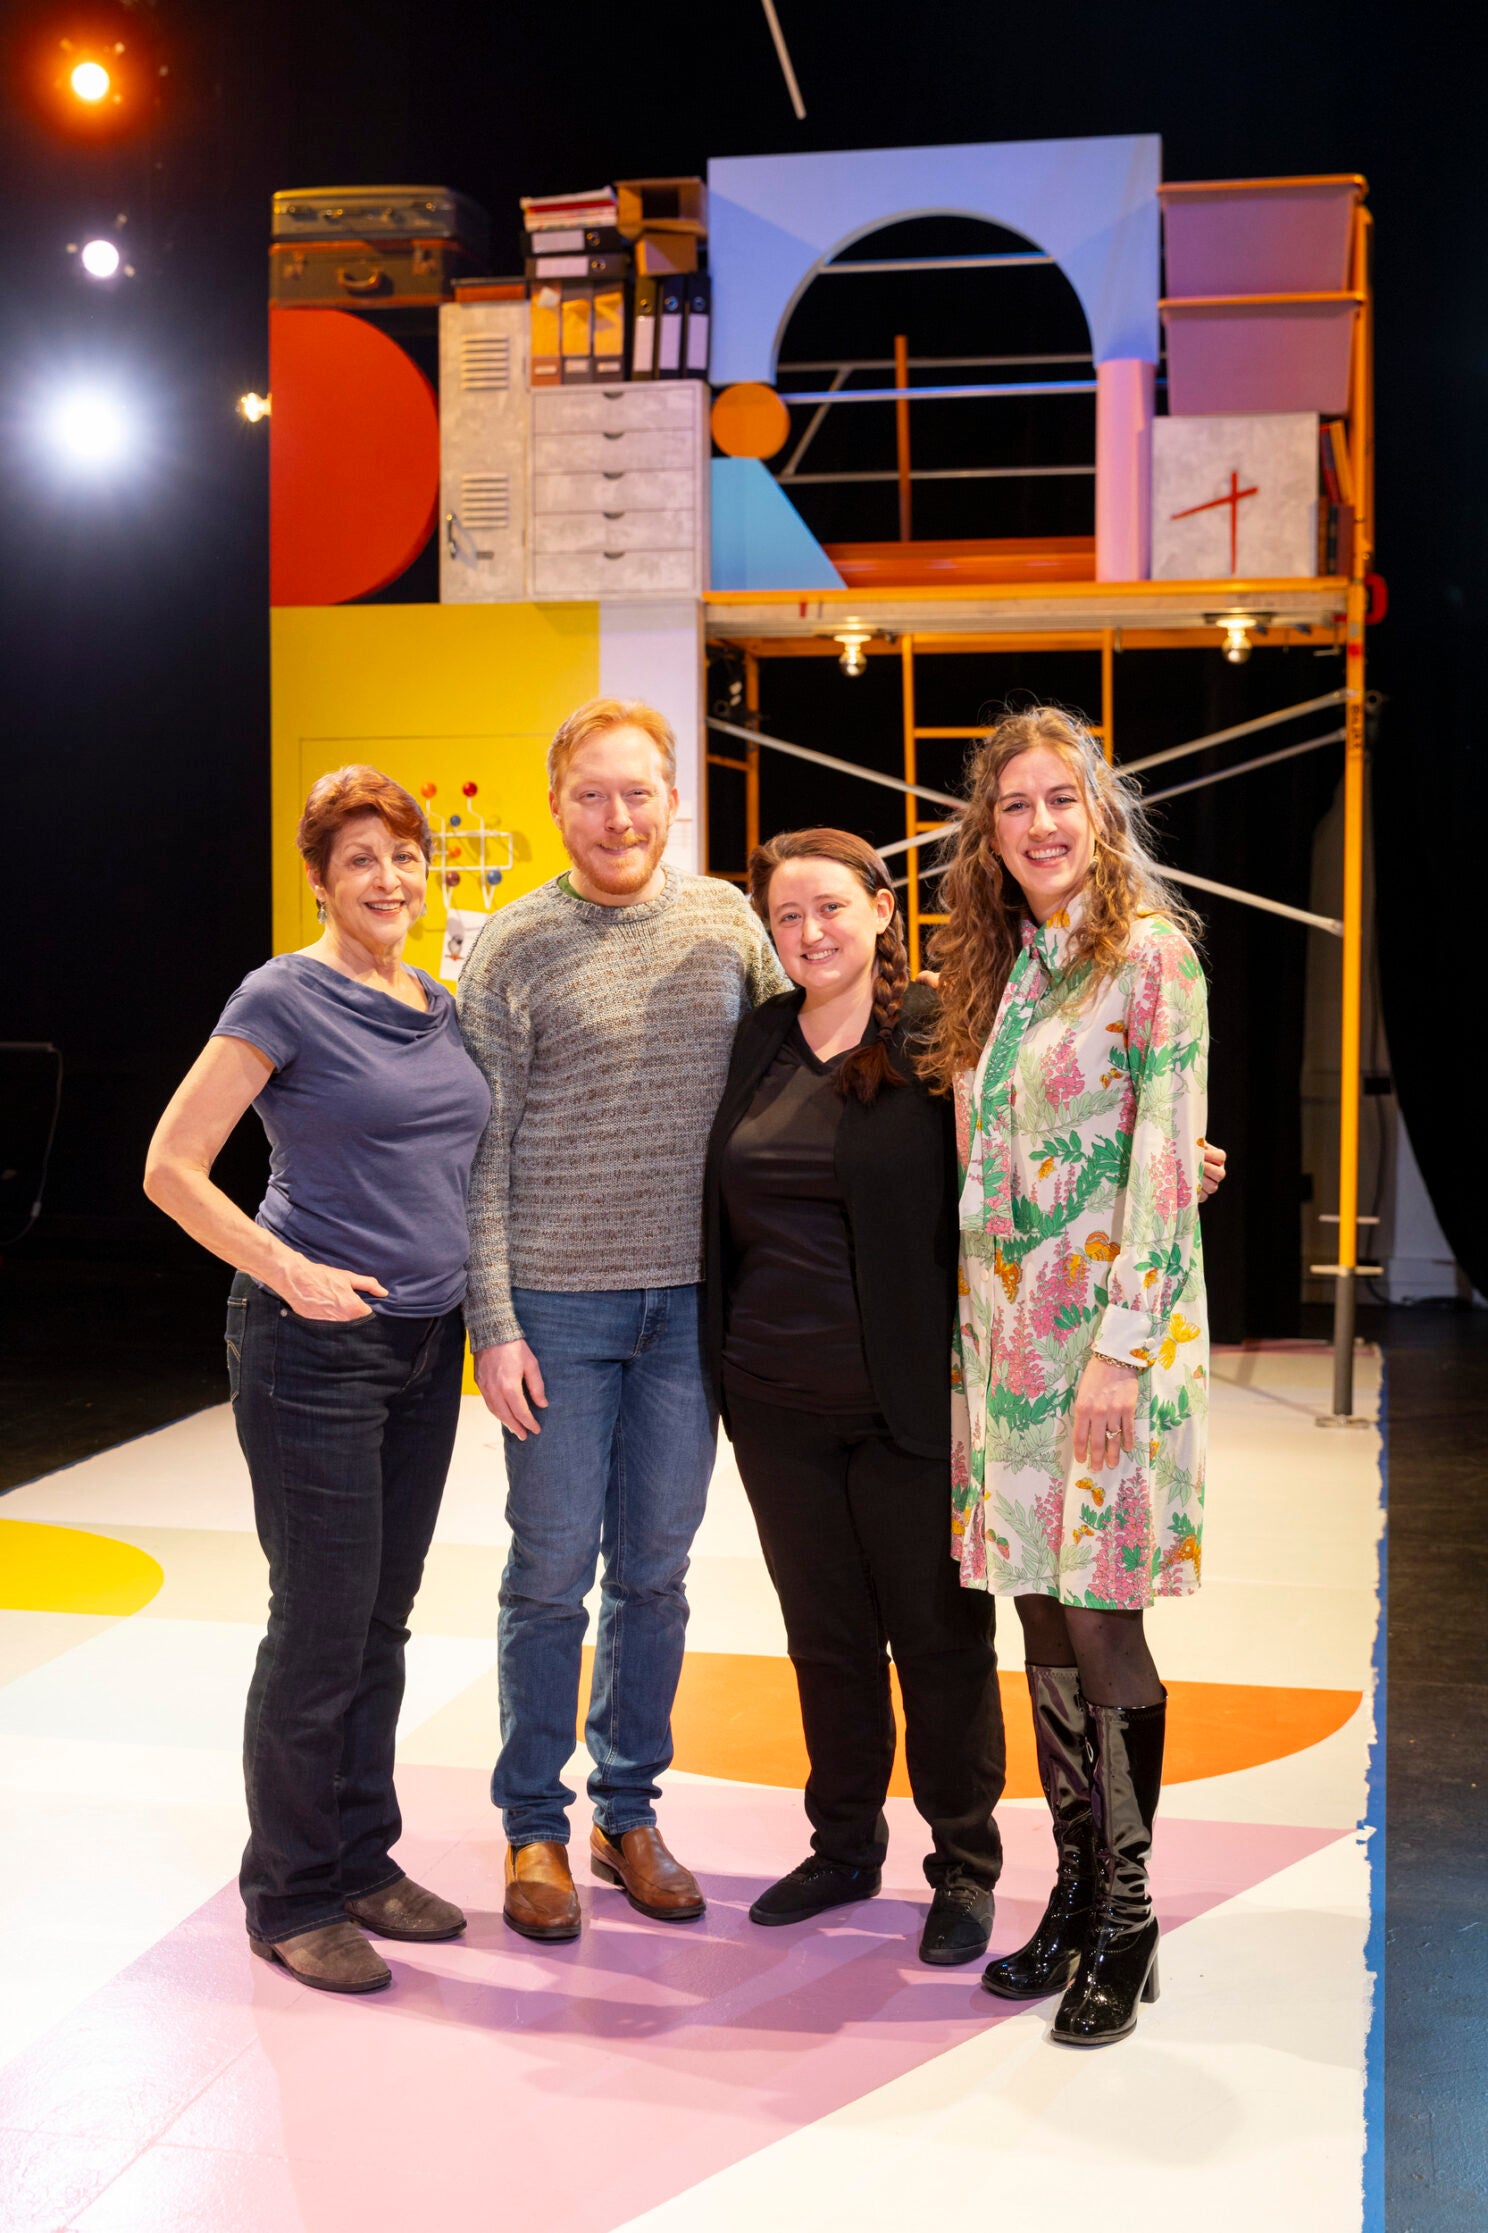 Stephanie Clayman (from left), Matthew Zahnzinger, Elaine Mangelinkx, and Cassie Chapados pose for a photo on the Beyond Words stage.